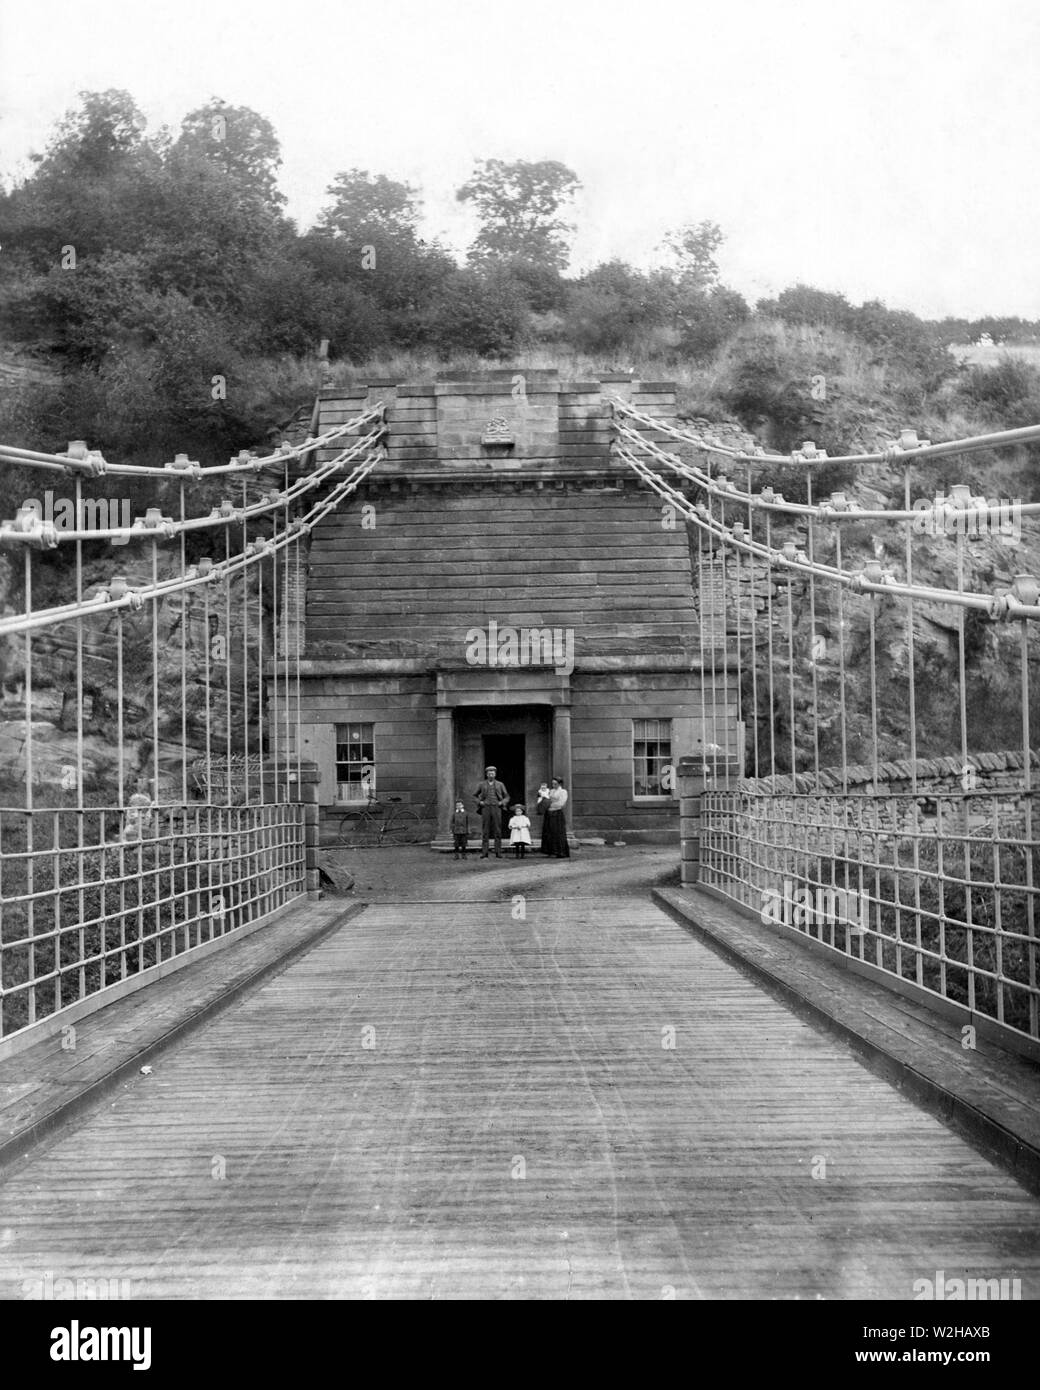 The Union Chain Bridge and Toll House on the English side of the Bridge. The Photograph was taken in approx 1899/1900 and the with the Roxburgh family outside their home. The Toll House was demolished in the 1950s. The bridge still carries vehicular traffic and is the oldest suspension bridge in the world still doing so. Crossing the River Tweed linking England and Scotland. The bridge is near the village of Berwick upon Tweed and was designed by Captain Samuel Brown RN. Stock Photo